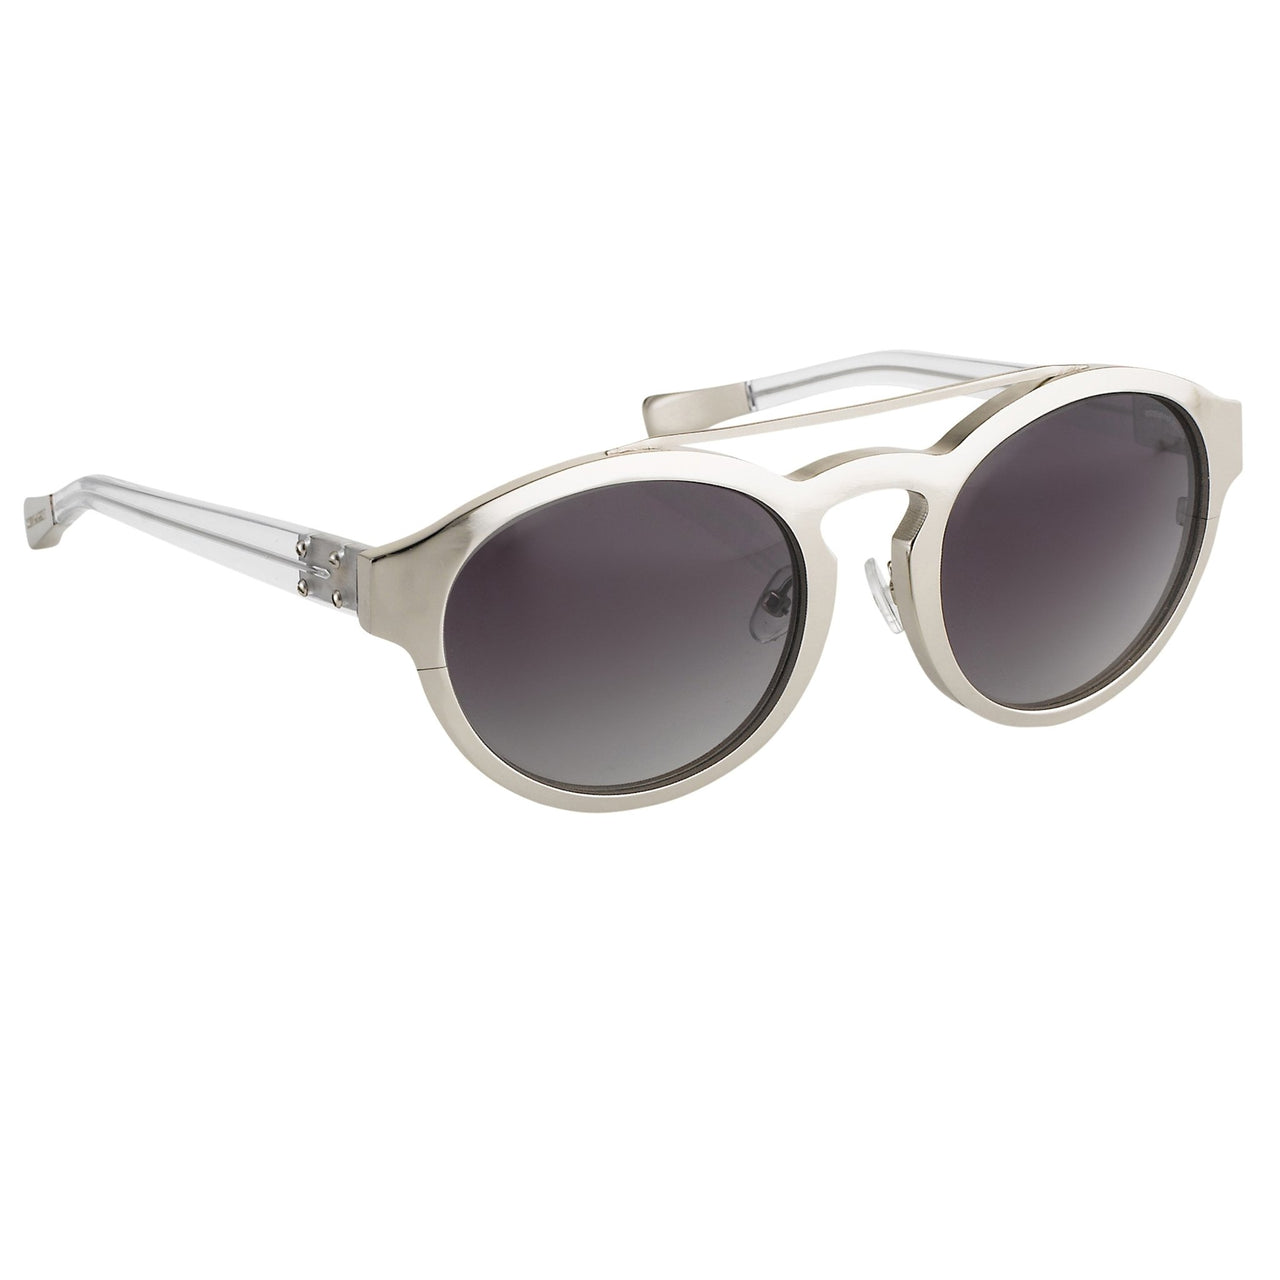 Kris Van Assche by OLIVER PEOPLES Sunglasses – THE STOKEDGATE Tokyo